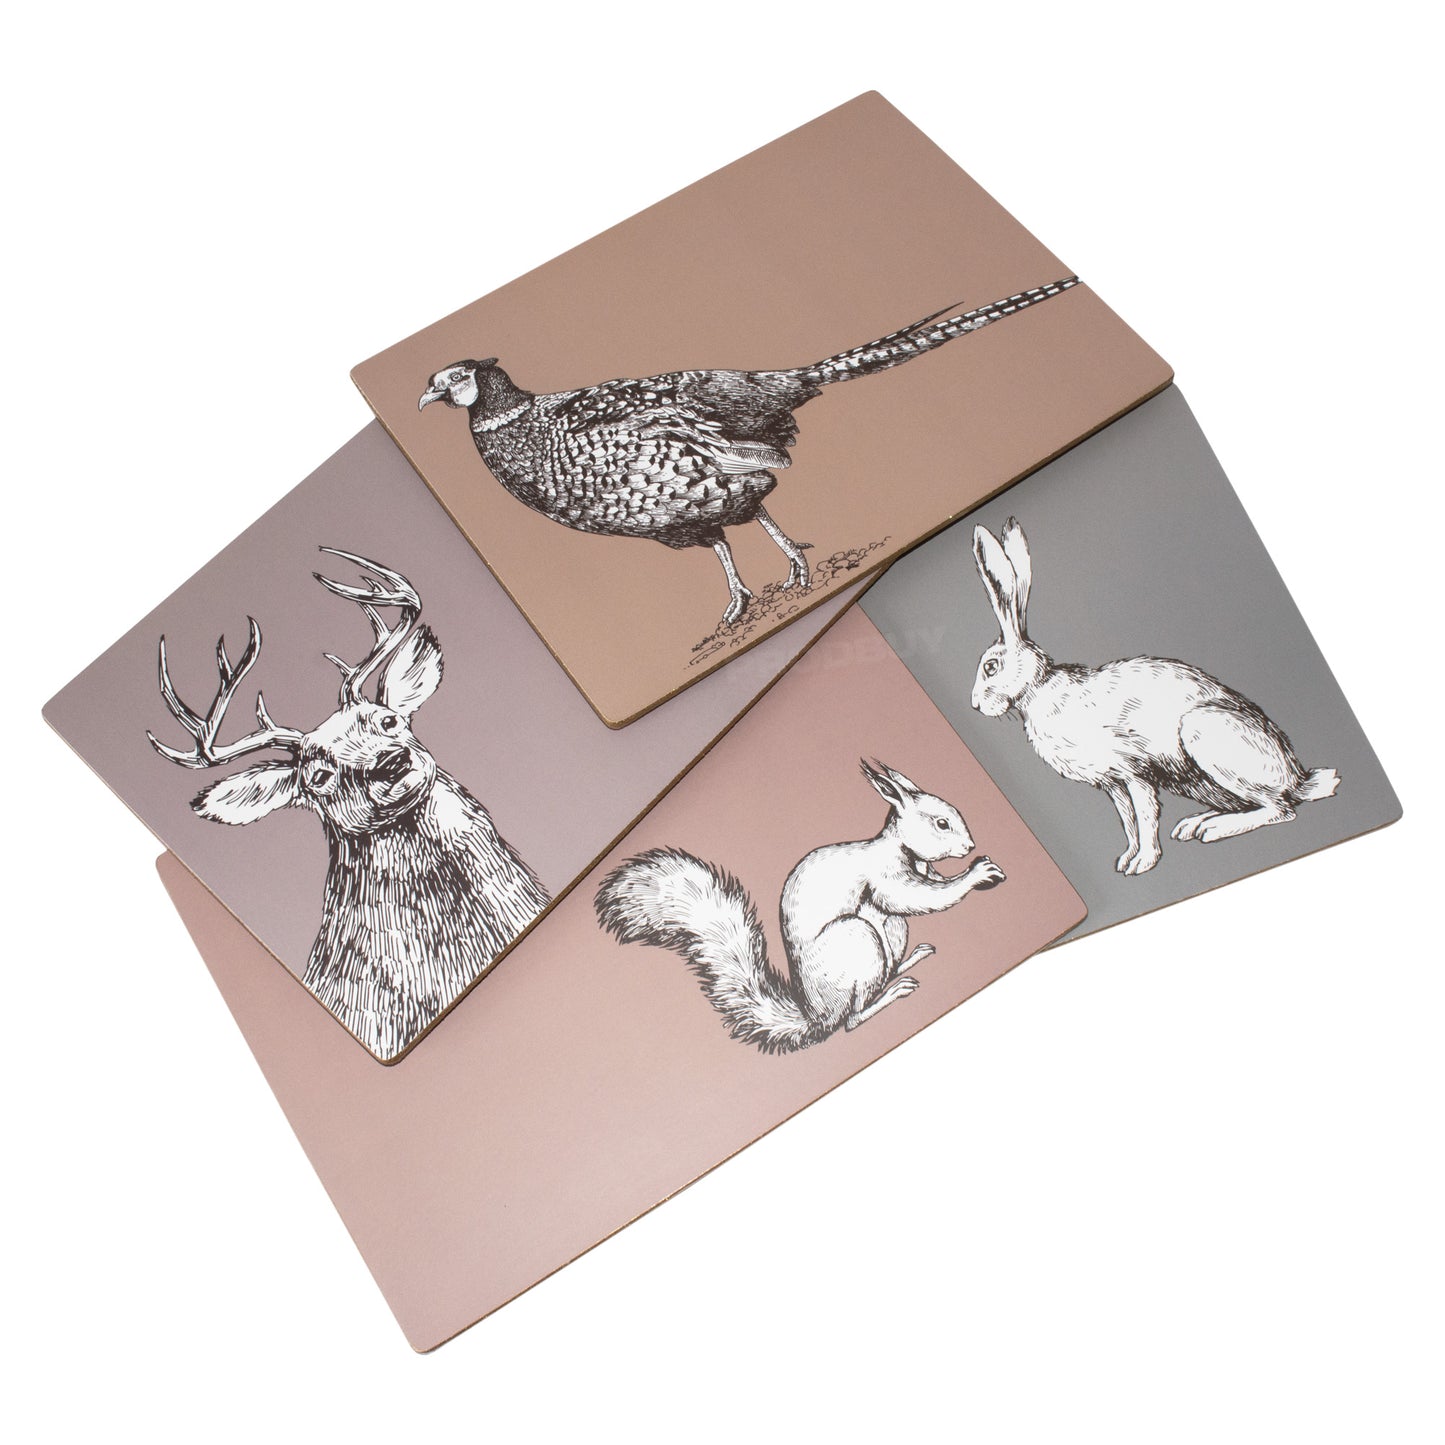 Set of 4 Placemats & 4 Coasters with Woodland Animals